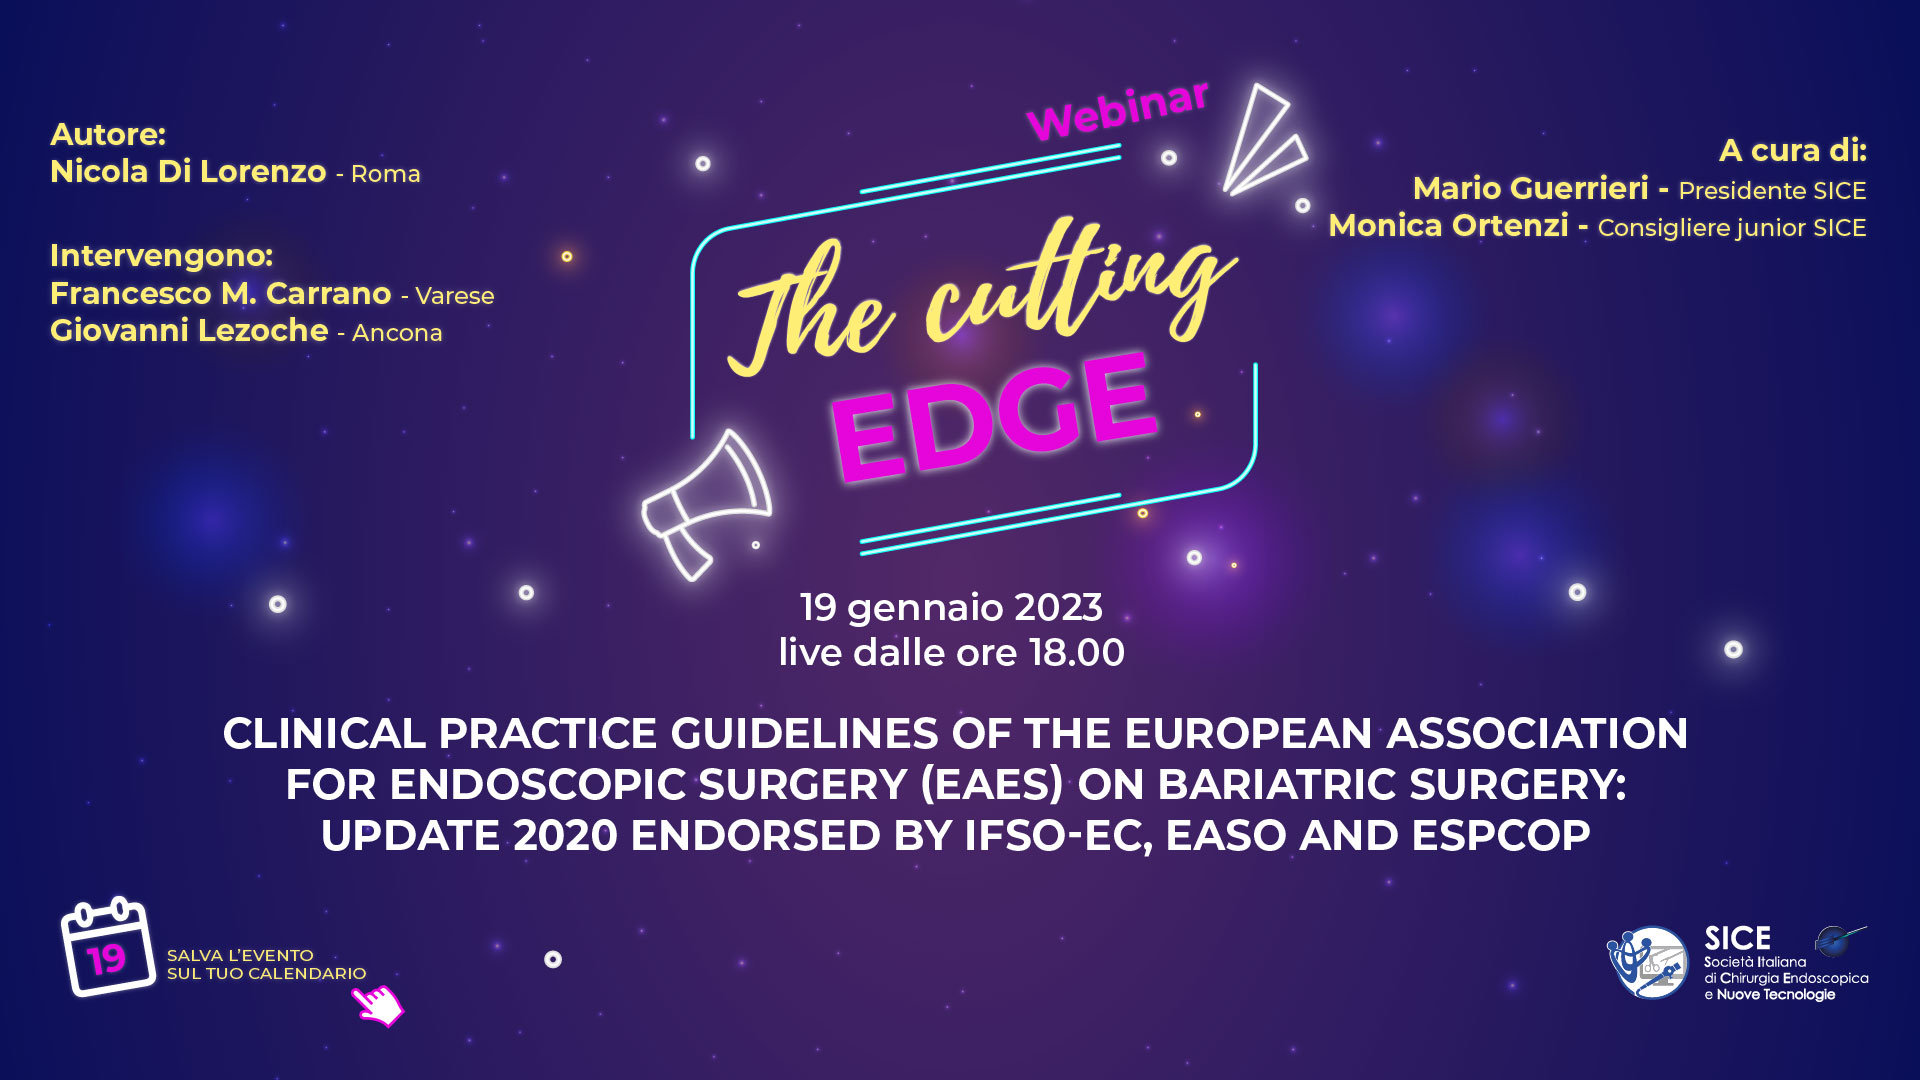 Clinical practice guidelines of the european association for endoscopic surgery (EAES) on bariatric surgery: update 2020 endorsed by IFSO-EC, EASO and ESPCOP